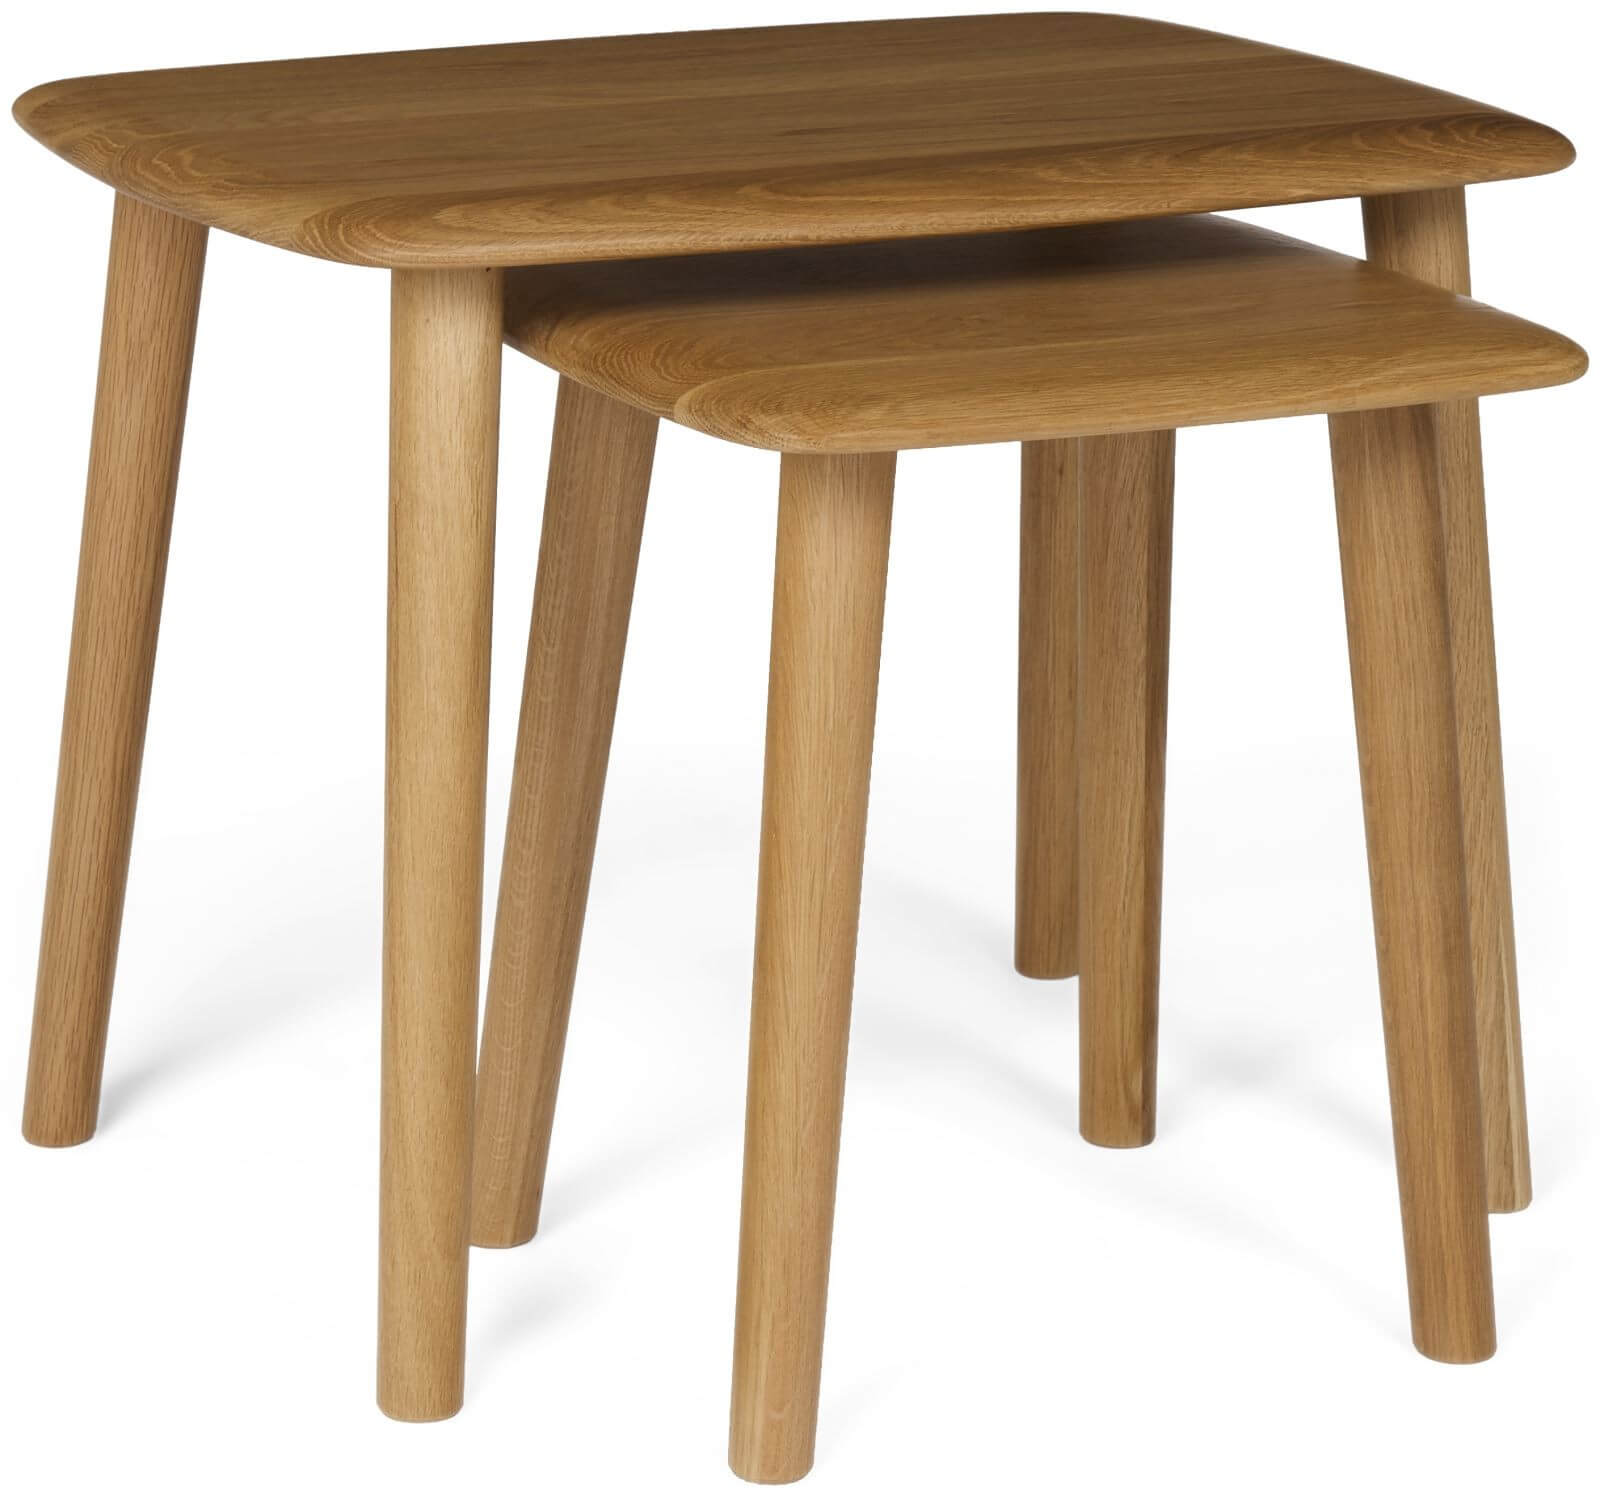 Showing image for Bergen nest of 2 tables